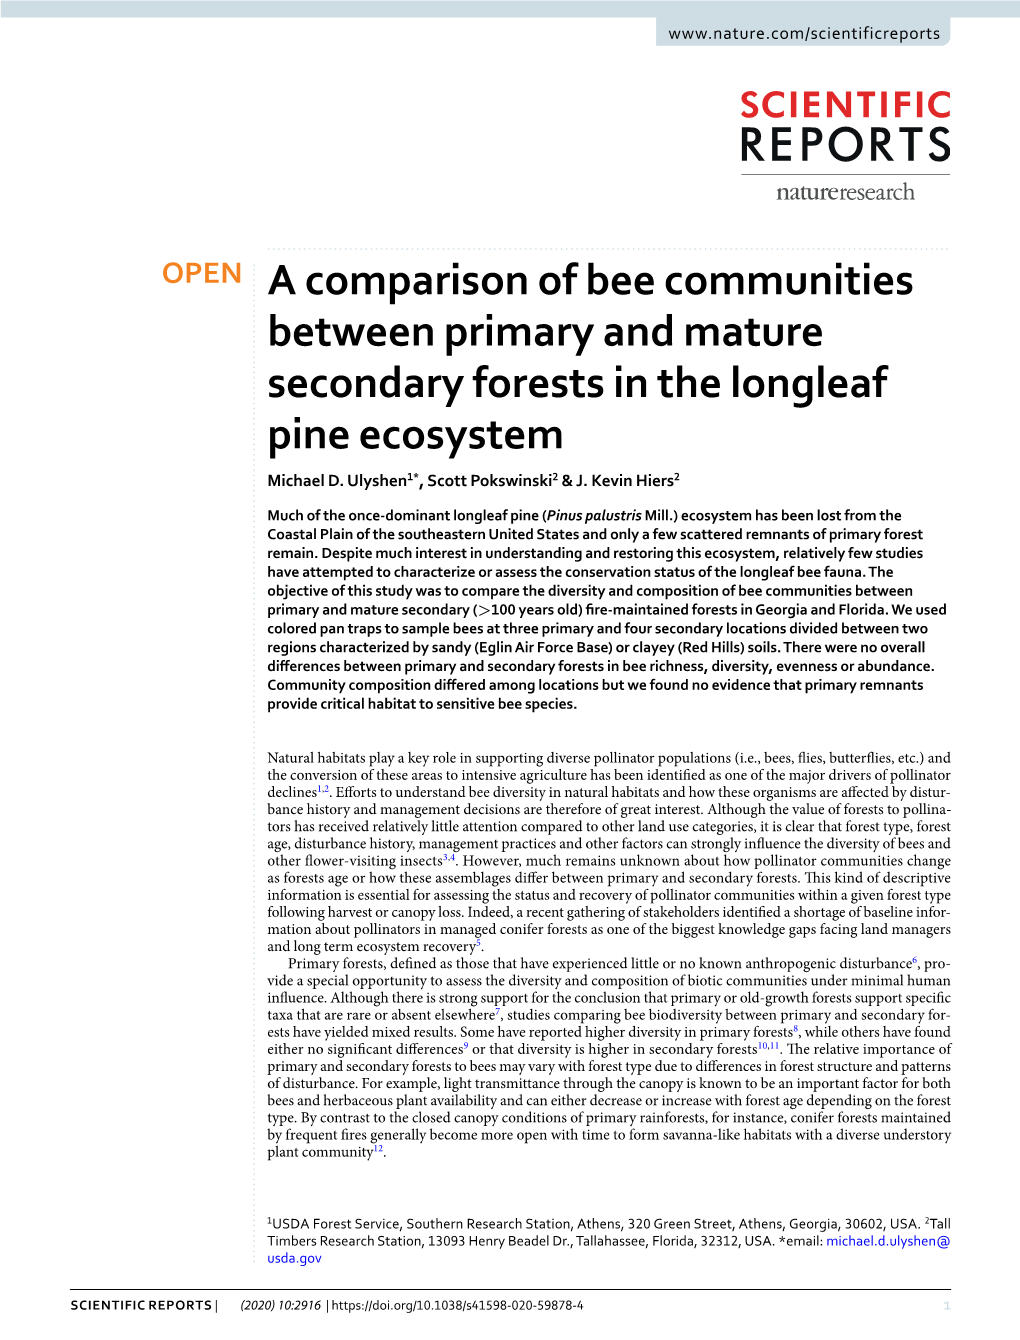 A Comparison of Bee Communities Between Primary and Mature Secondary Forests in the Longleaf Pine Ecosystem Michael D